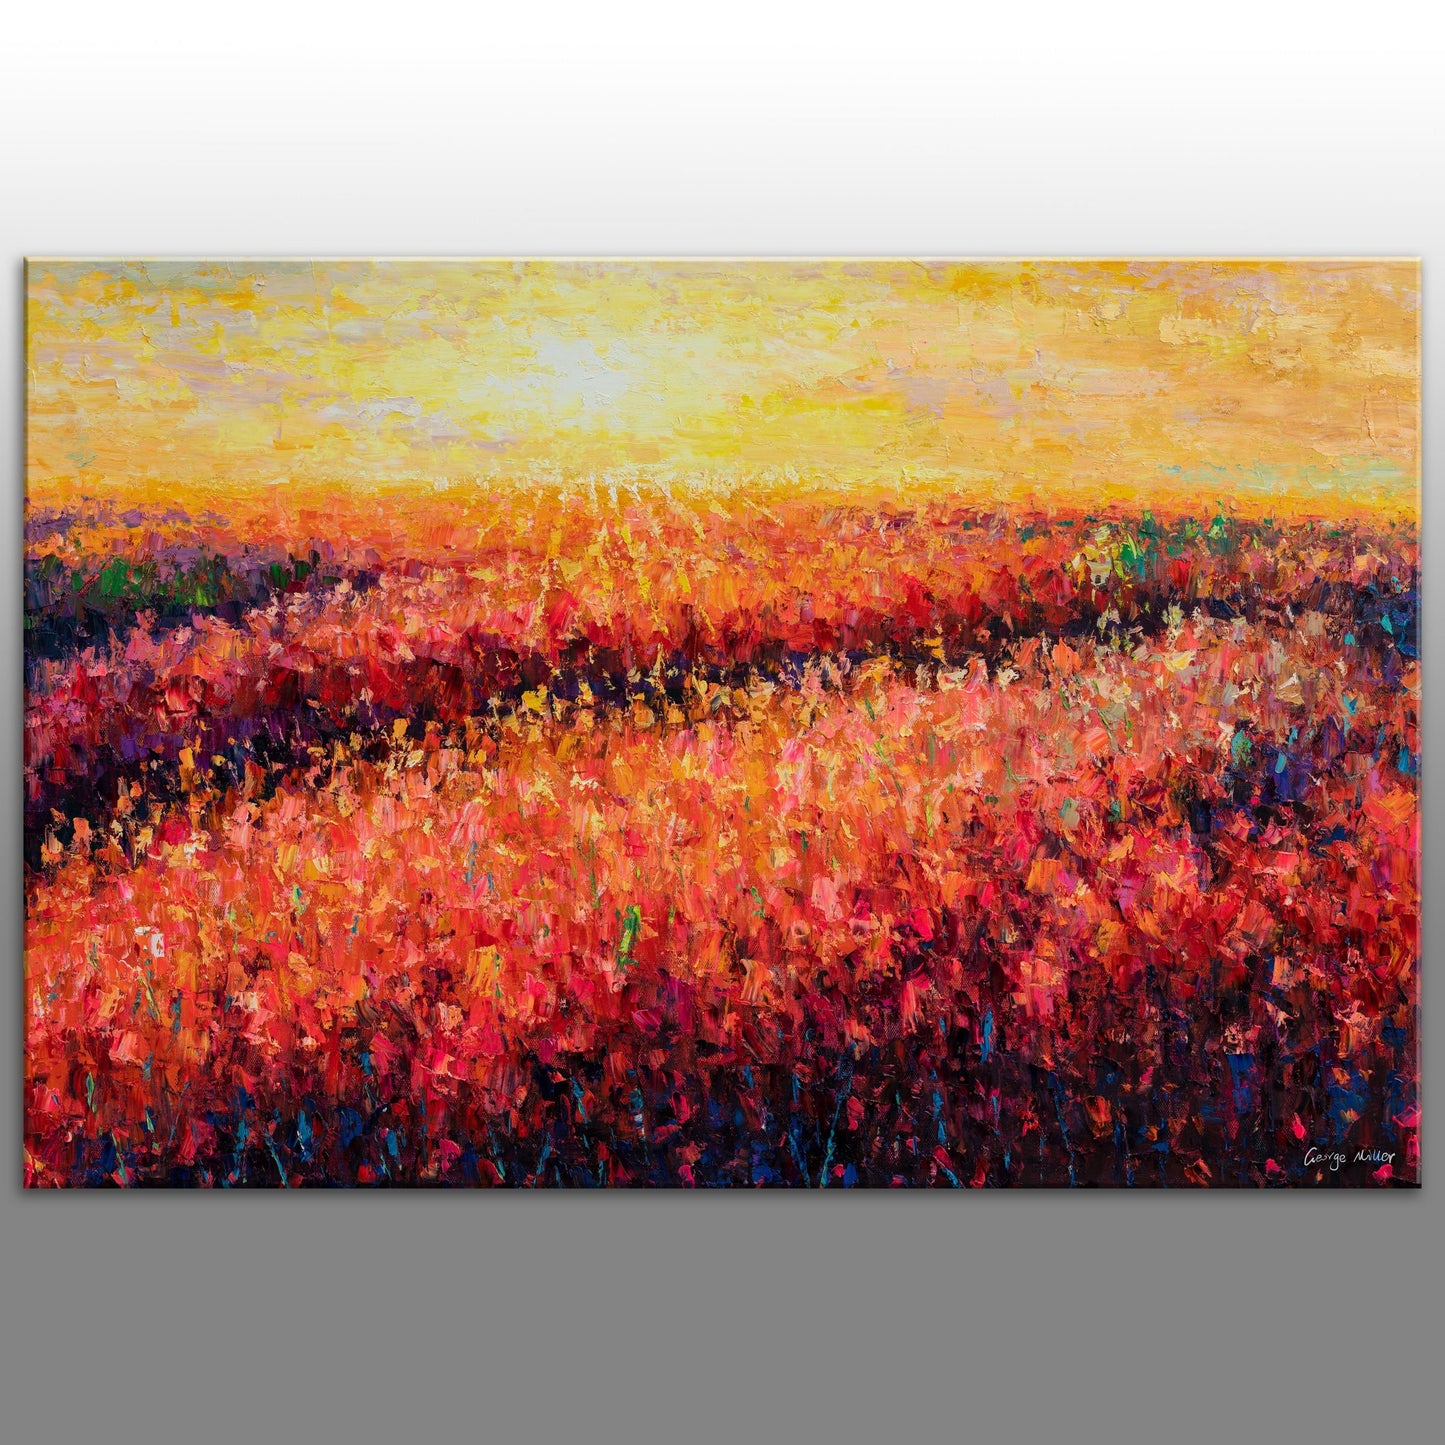 Landscape Oil Painting Red Flower Fields at Dawn, large canvas painting, modern painting, large canvas wall art, abstract oil painting